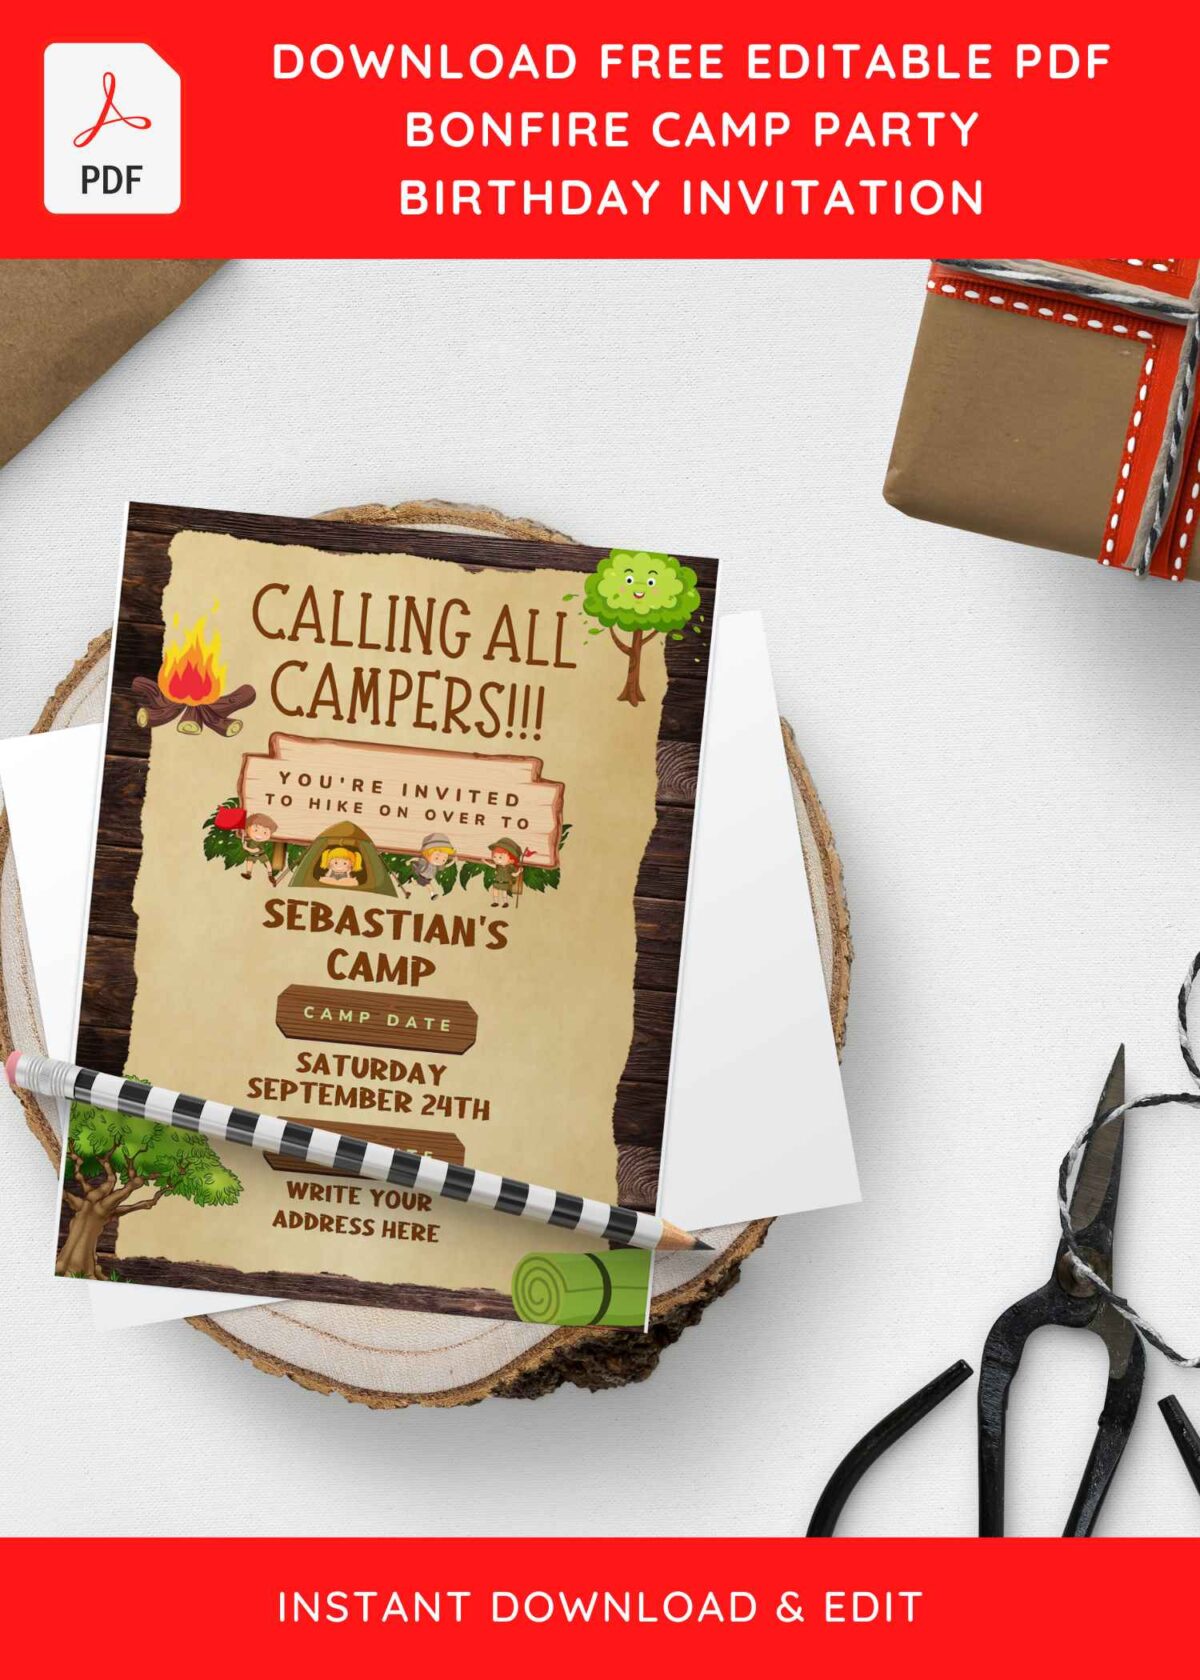 (Free Editable PDF) Camping Kids Birthday Invitation Templates with adorable children